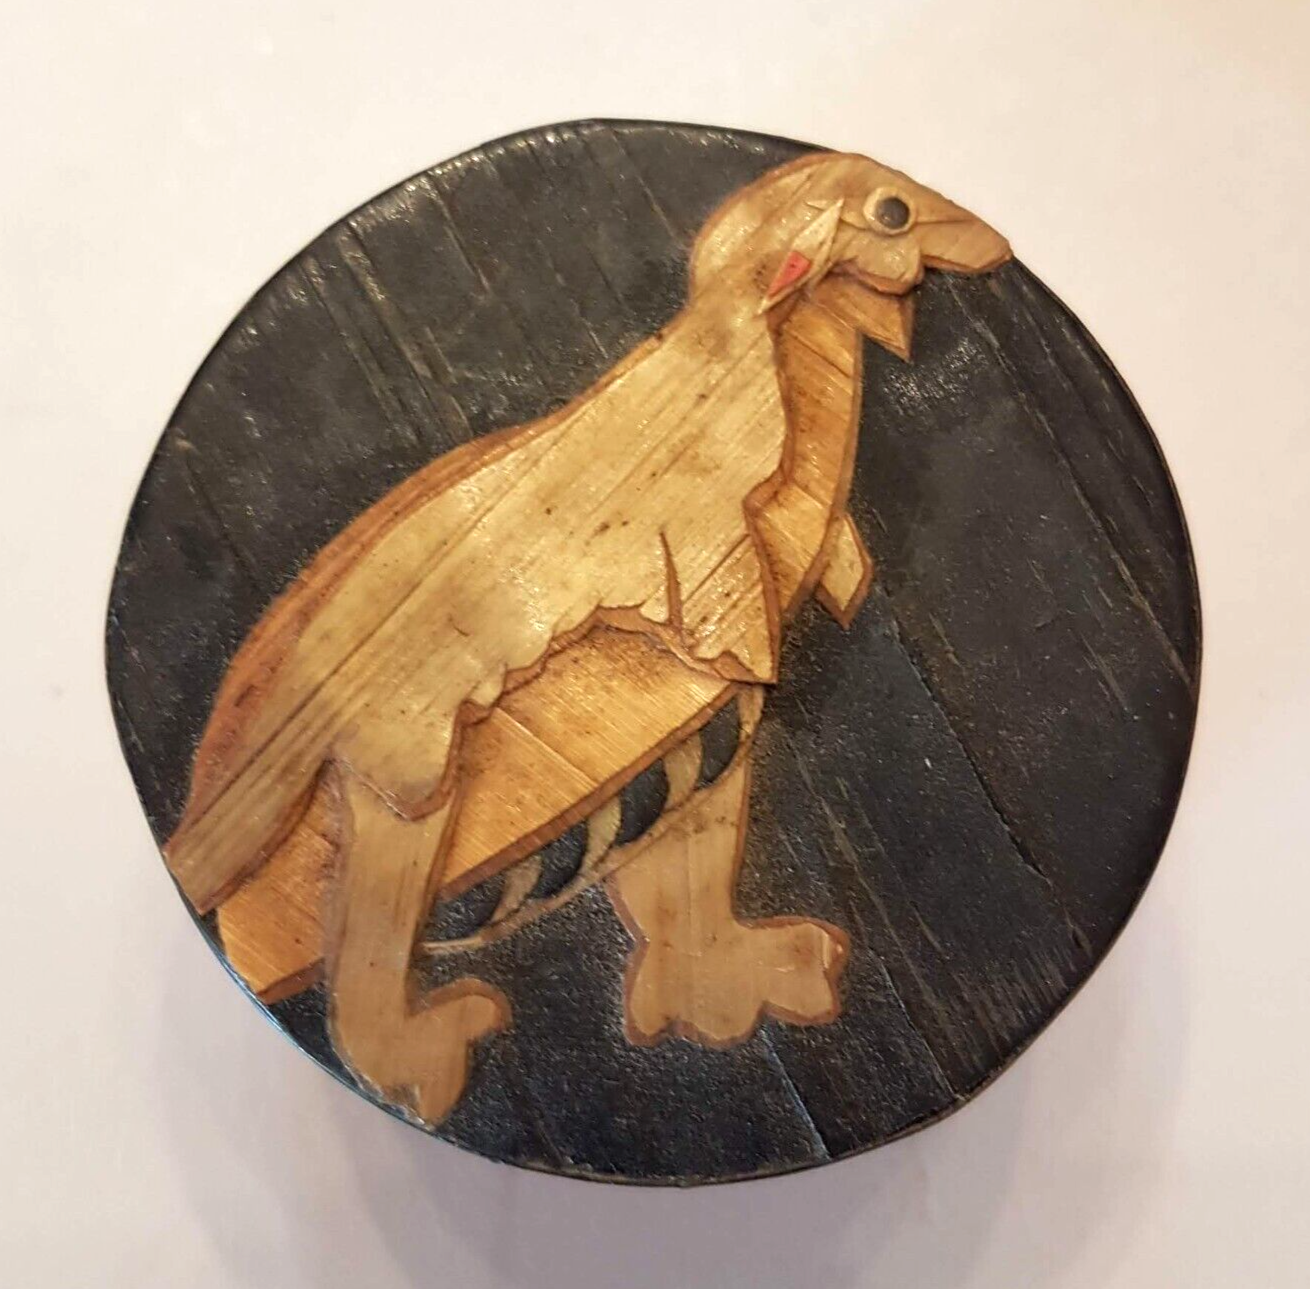 Primary image for Dinosaur Sculpture Bamboo Wood Trinket Pill Box Red Satin Lining Jewelry Gift